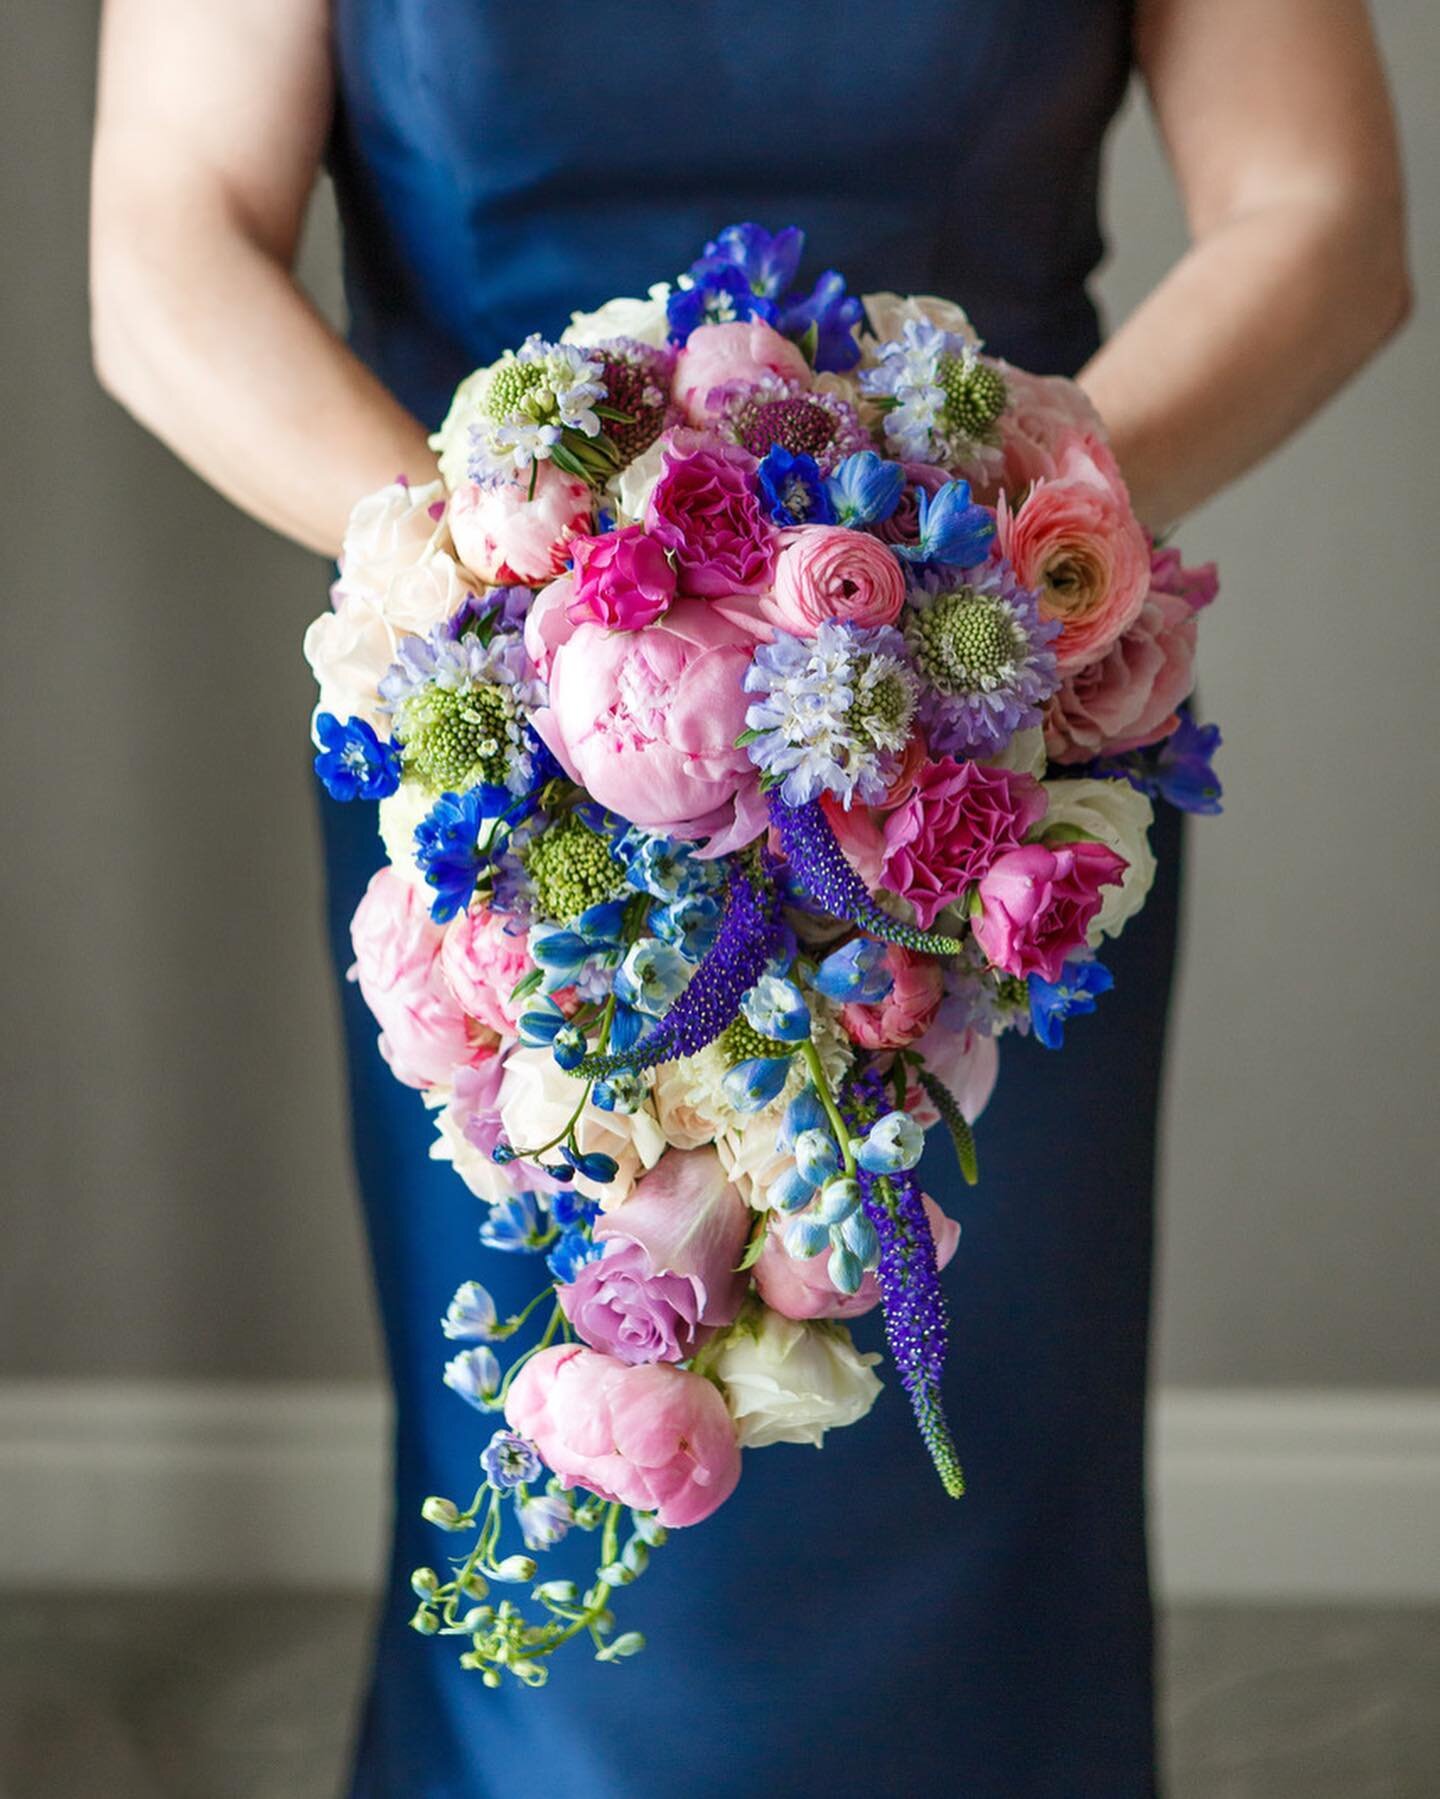 How about a little something blue for this dreamy colorful bouquet. Congratulations Fritz and Tess!

Floral: @festivestl 
Photo. @photo.elegance_1 
Venue: @ritzcarltonstlouis